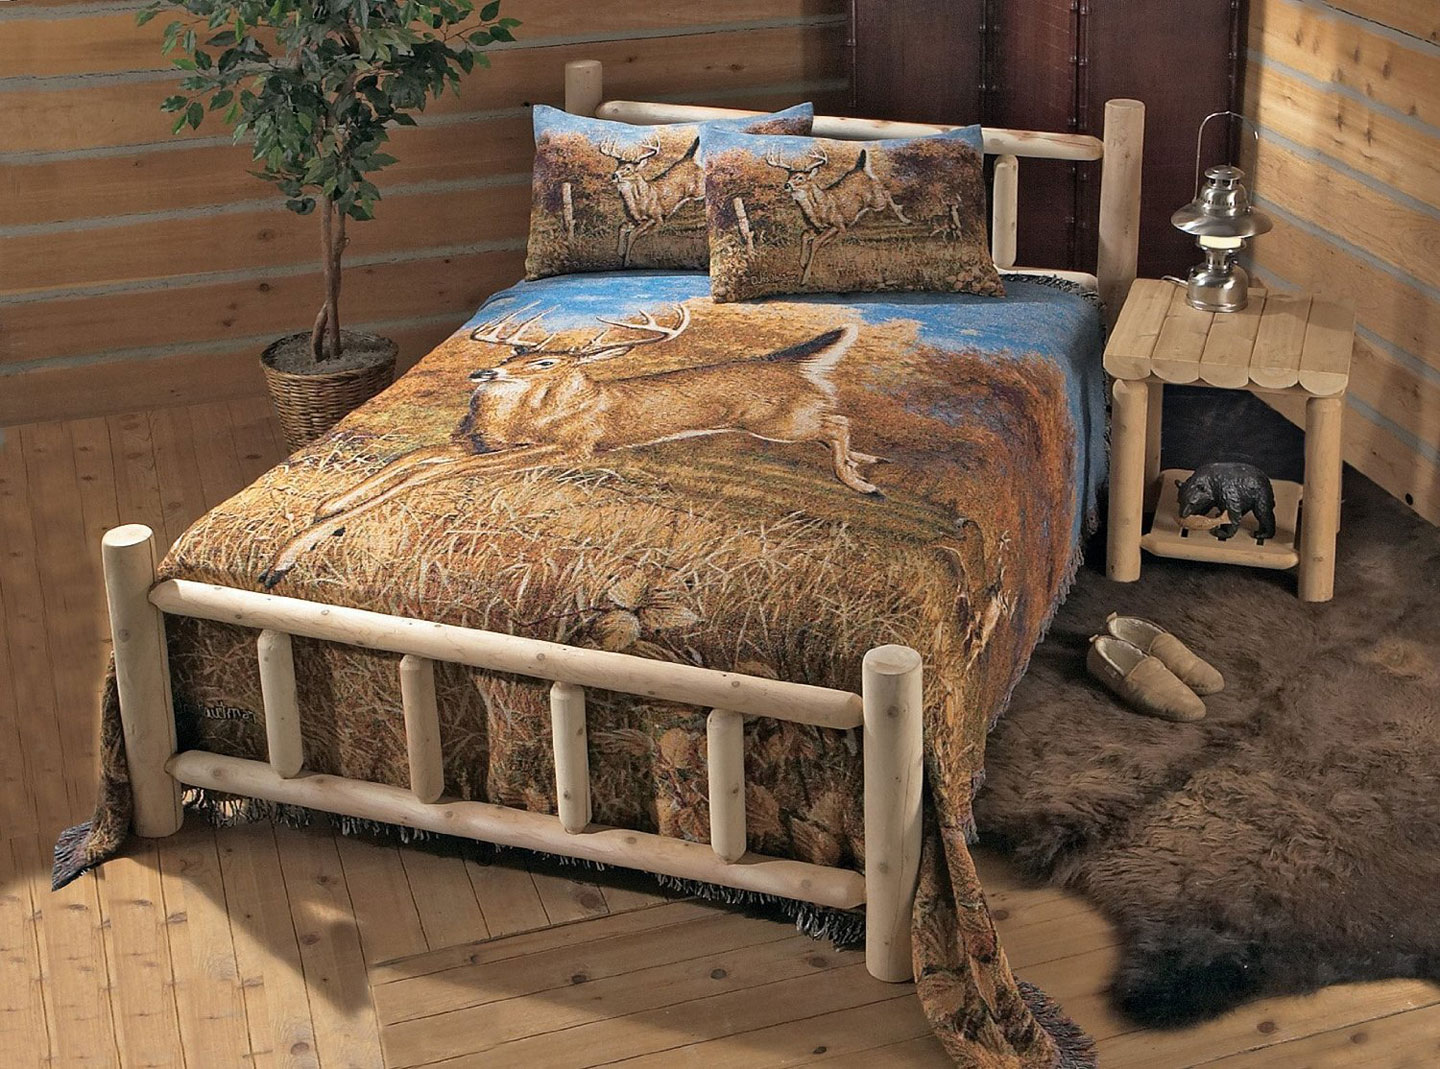 Animal Photograph Feats Great Animal Photograph Bedding Sets Feats With Grey Fur Rug And Trendy Rustic Bedroom Furniture Bedroom Breathtaking Rustic Bedroom Furniture Sets With Warm Impression